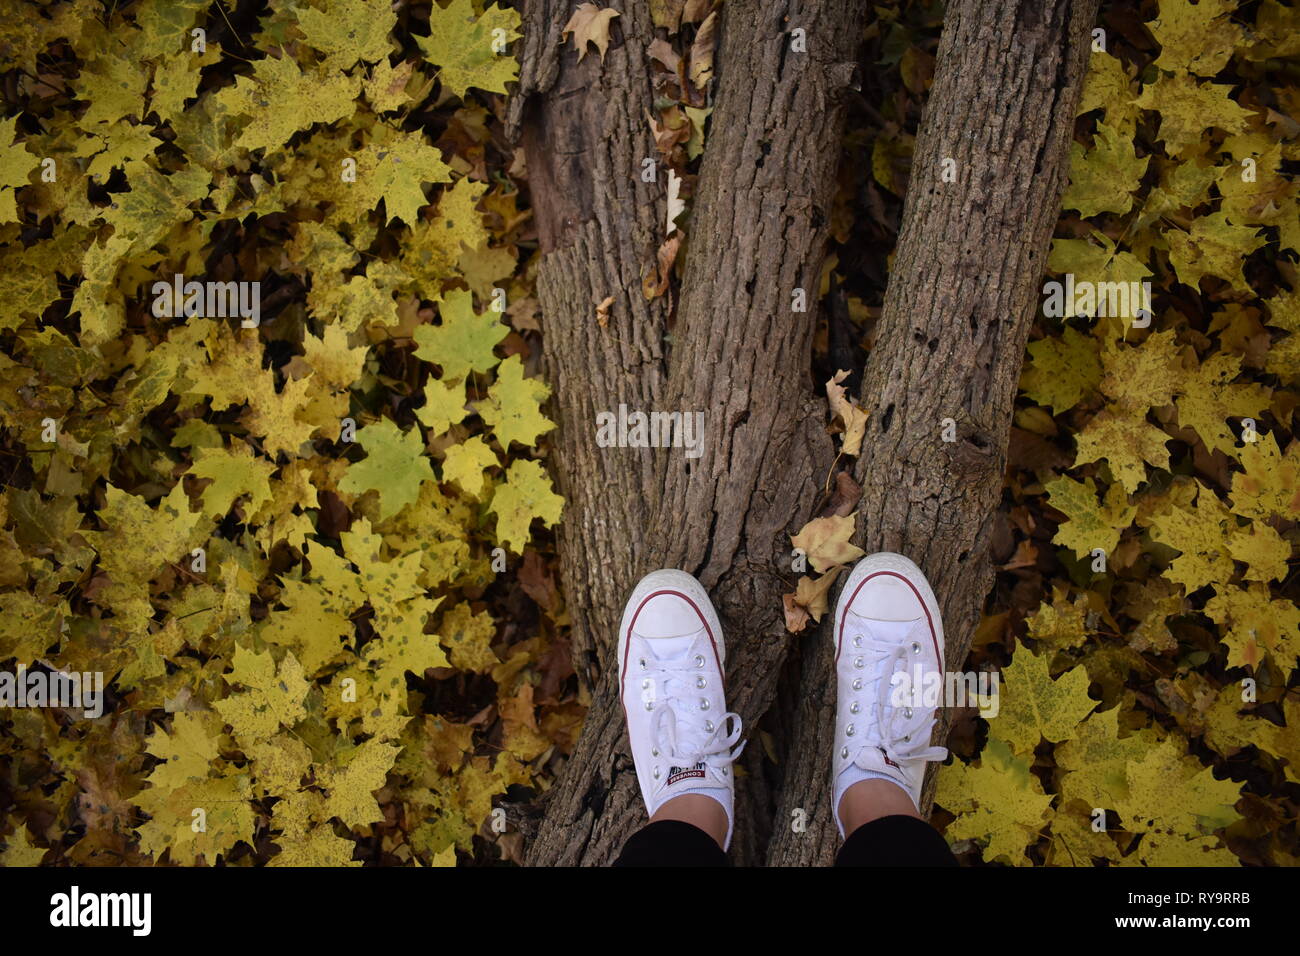 Feet on branch in yellow leaves Stock Photo